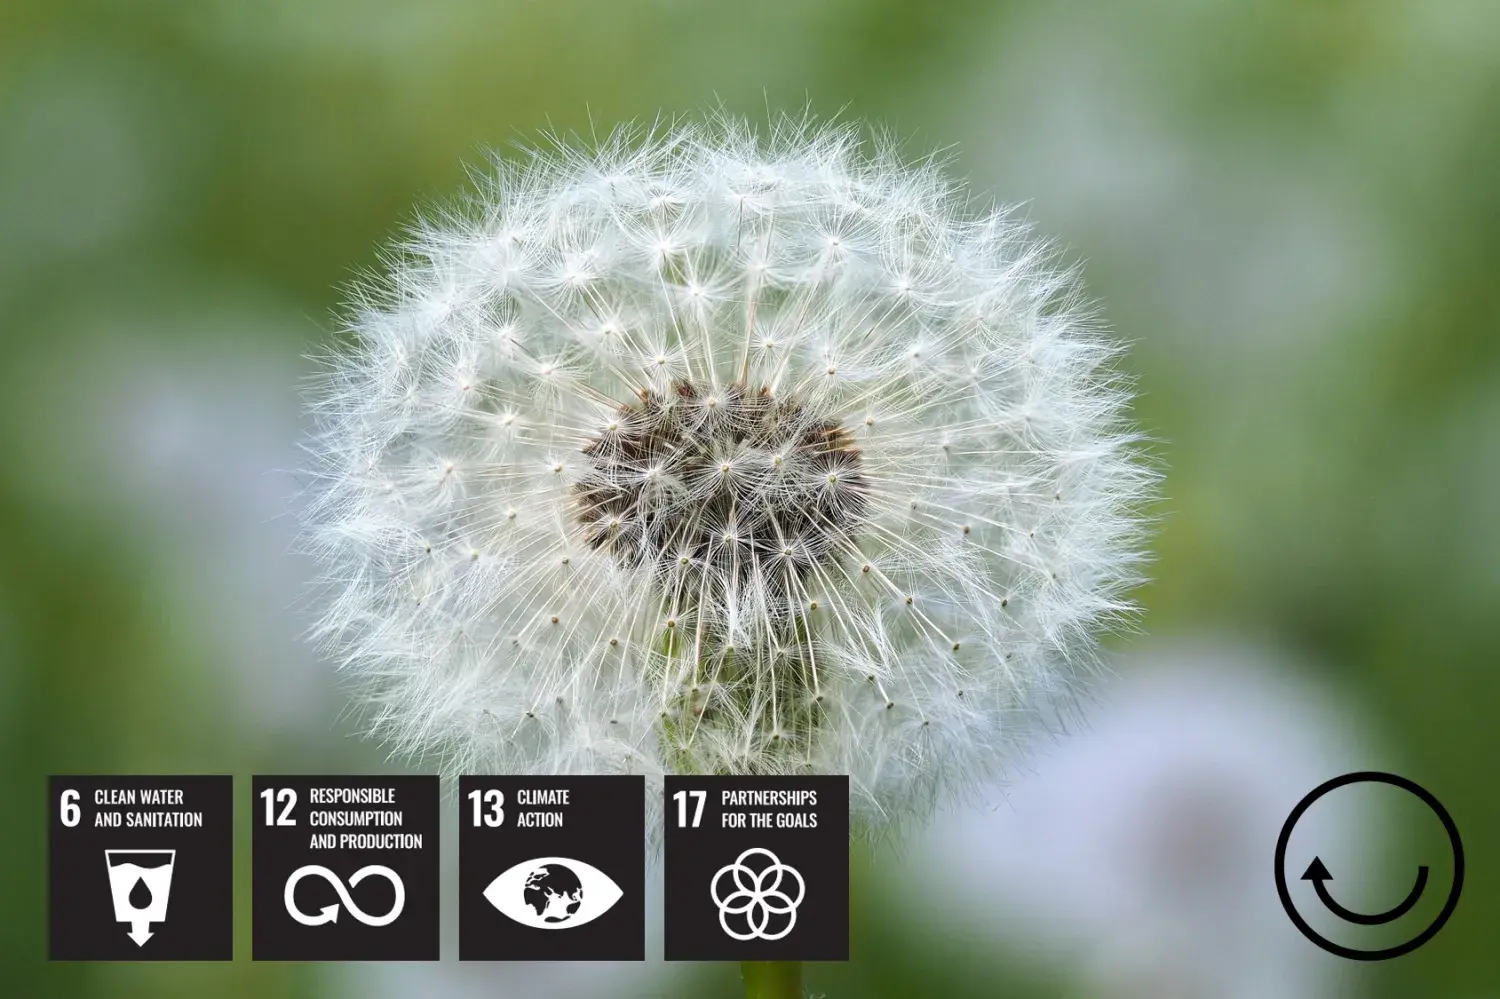 Think Circular image with UN SDG icons